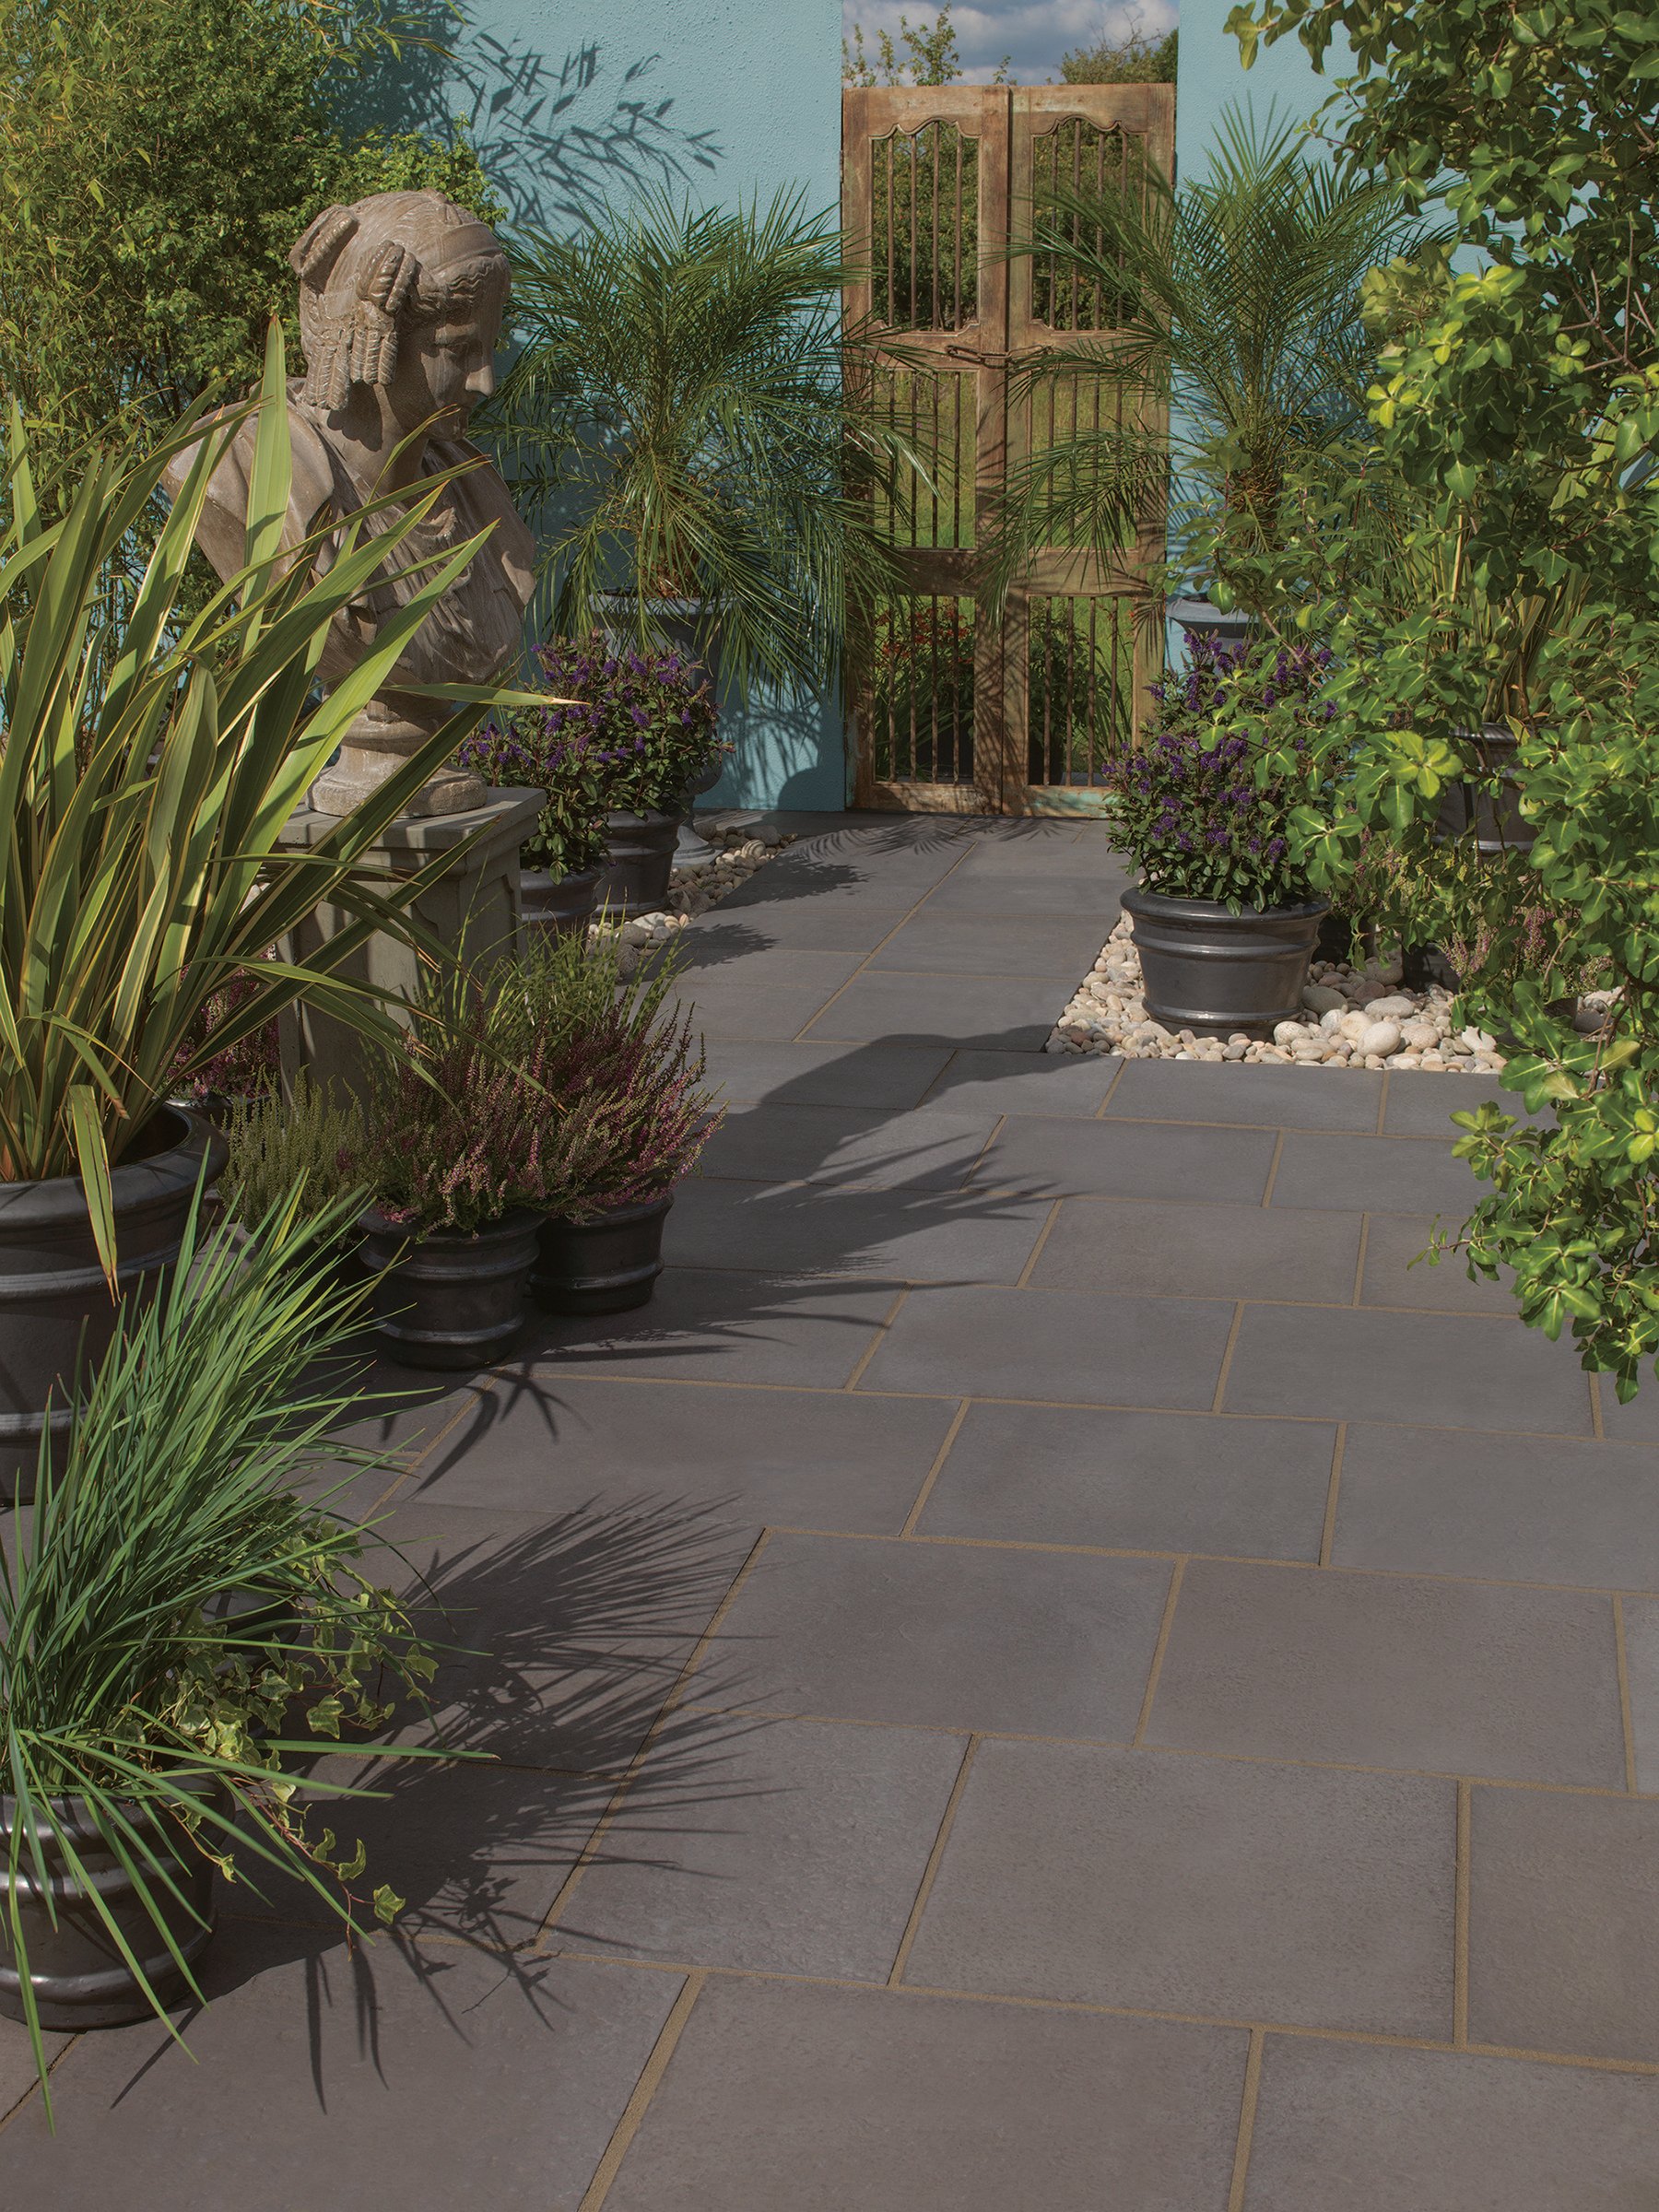 Bradstone Aged Riven Paving in Dark Grey combines the old and the new. Its distinctive weathered profile gives the paving a timeworn appearance.